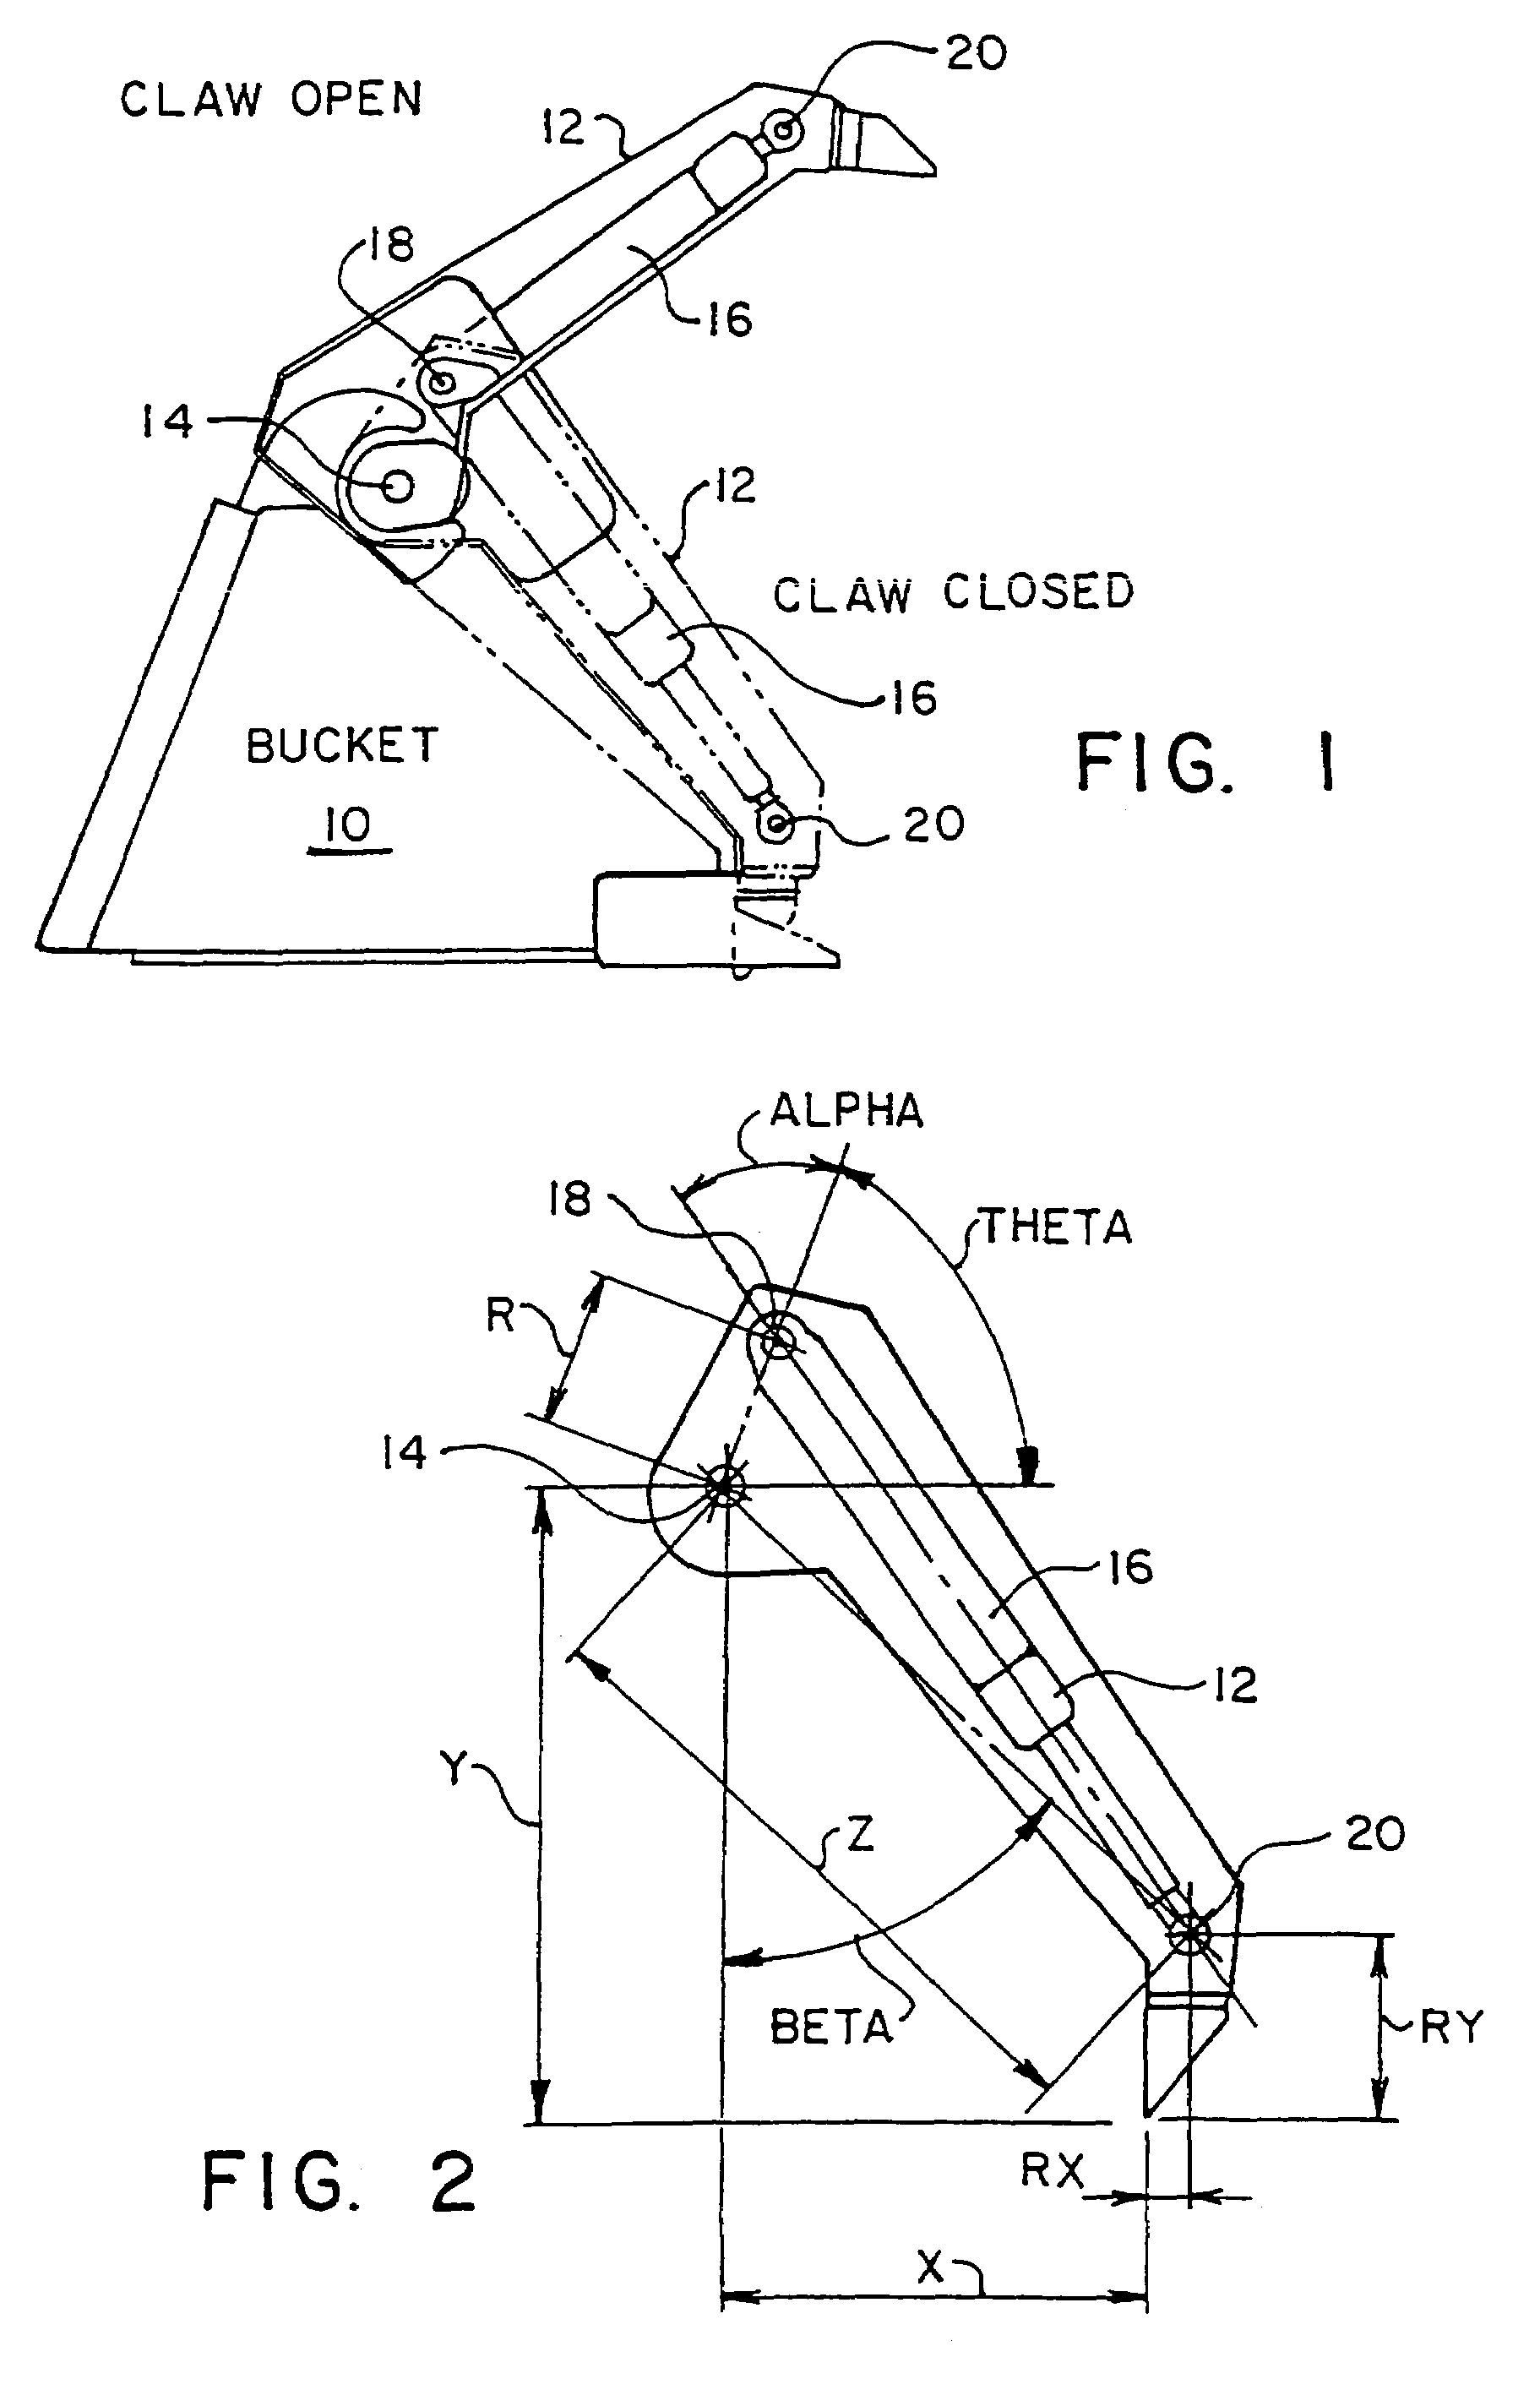 Demolition equipment having universal tines and a method for designing a universal tine